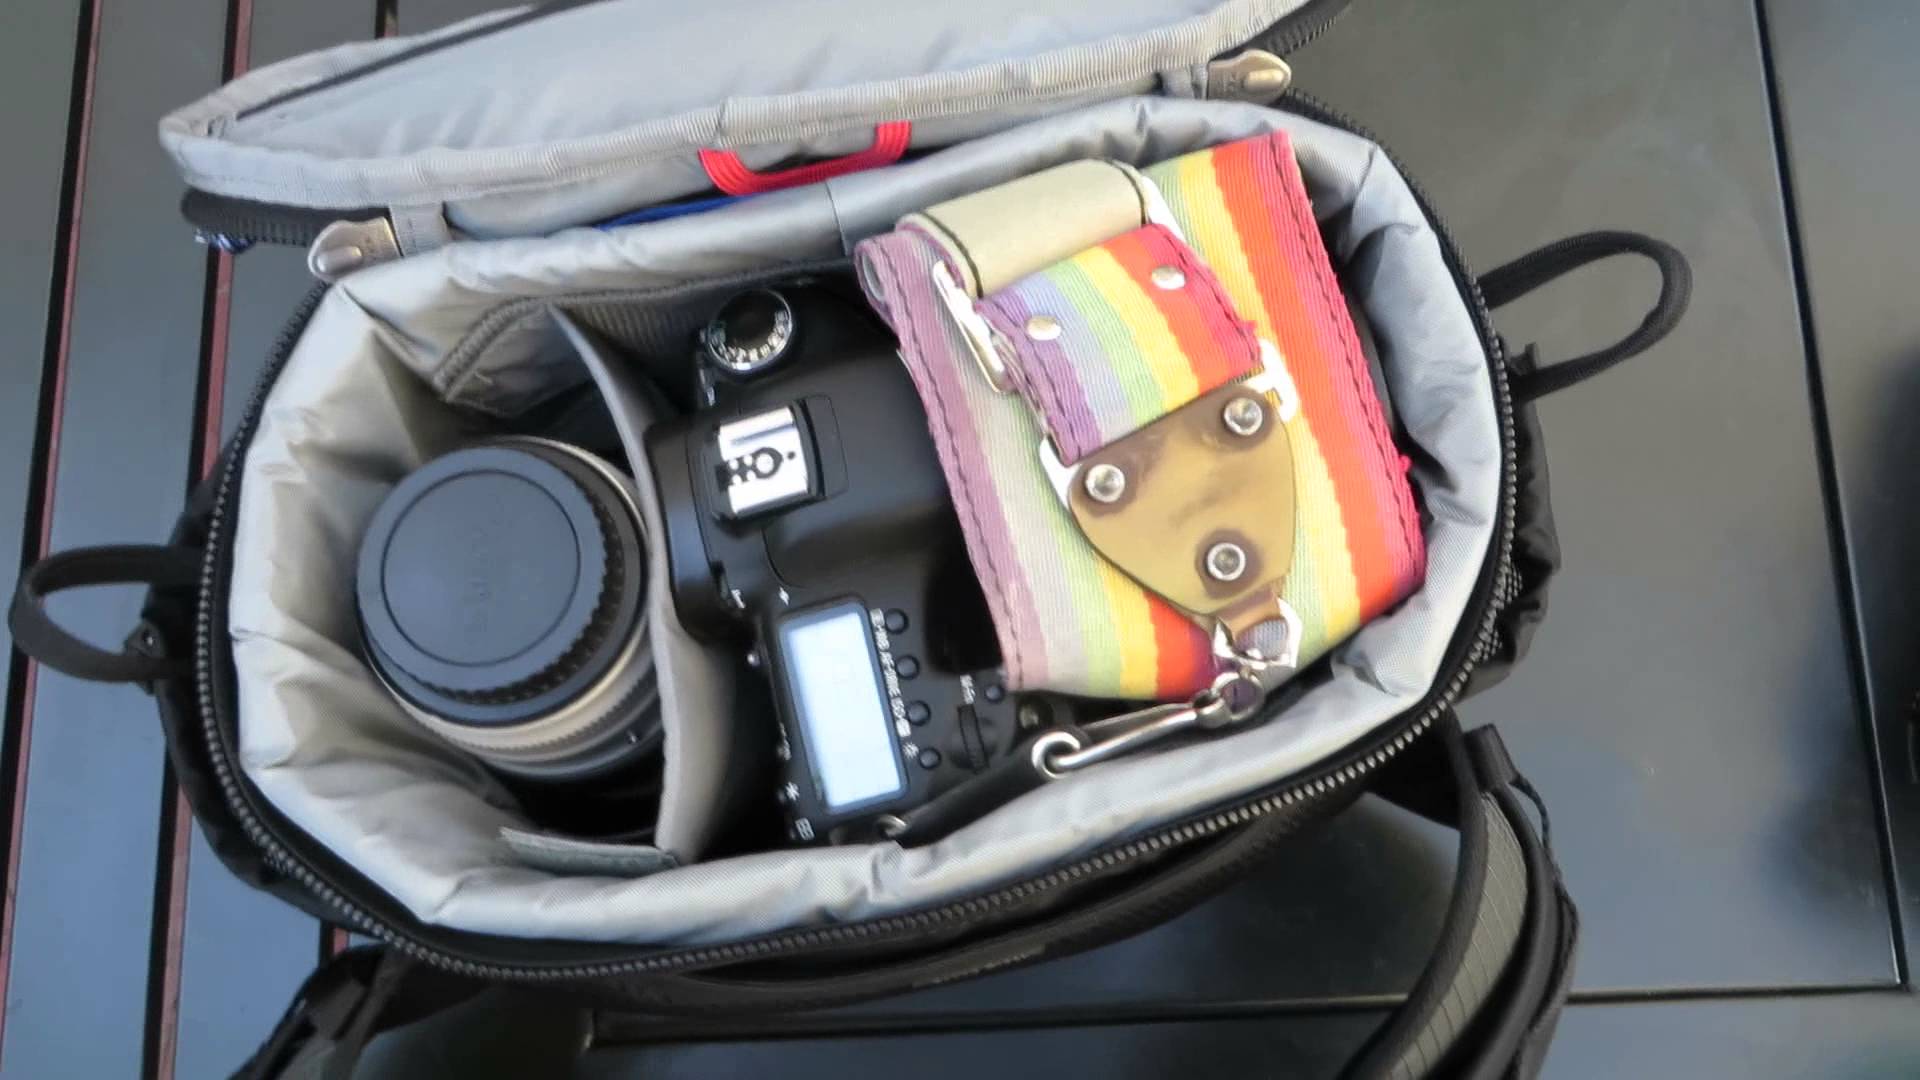 Football photography with a Think Tank Speed Freak bag - YouTube